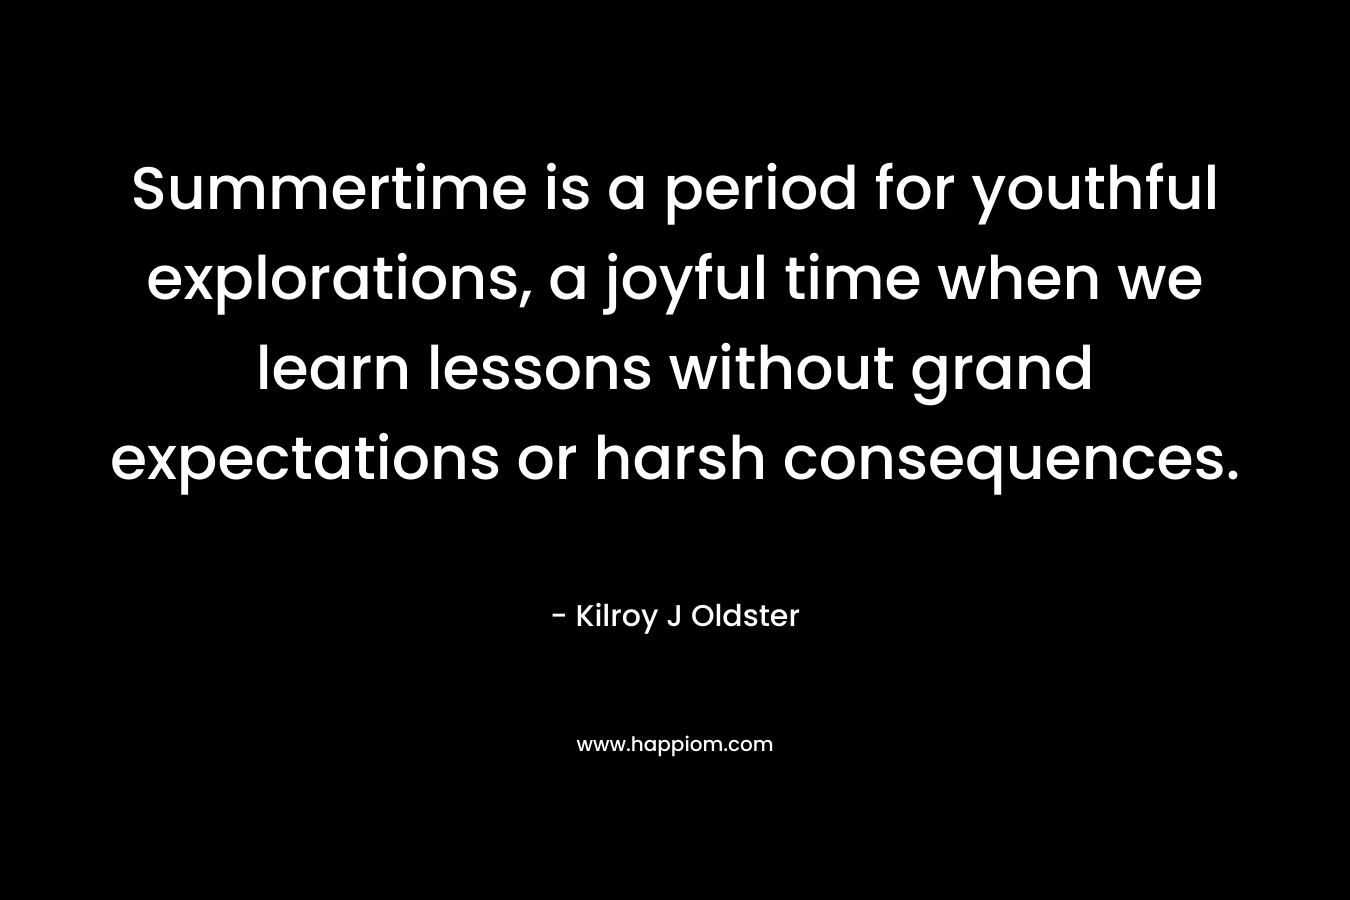 Summertime is a period for youthful explorations, a joyful time when we learn lessons without grand expectations or harsh consequences. – Kilroy J Oldster